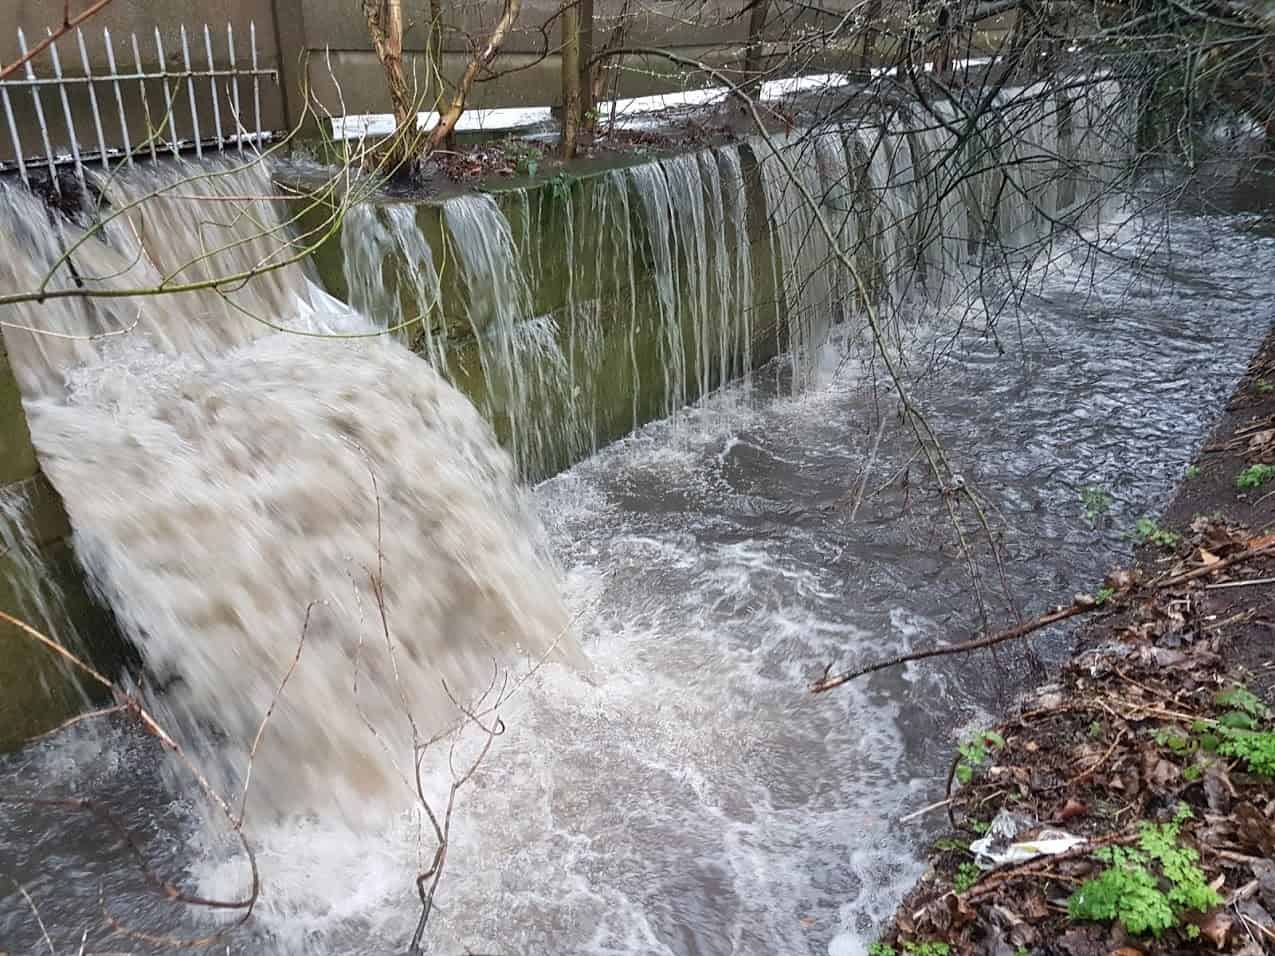 Have your say on sewage spills